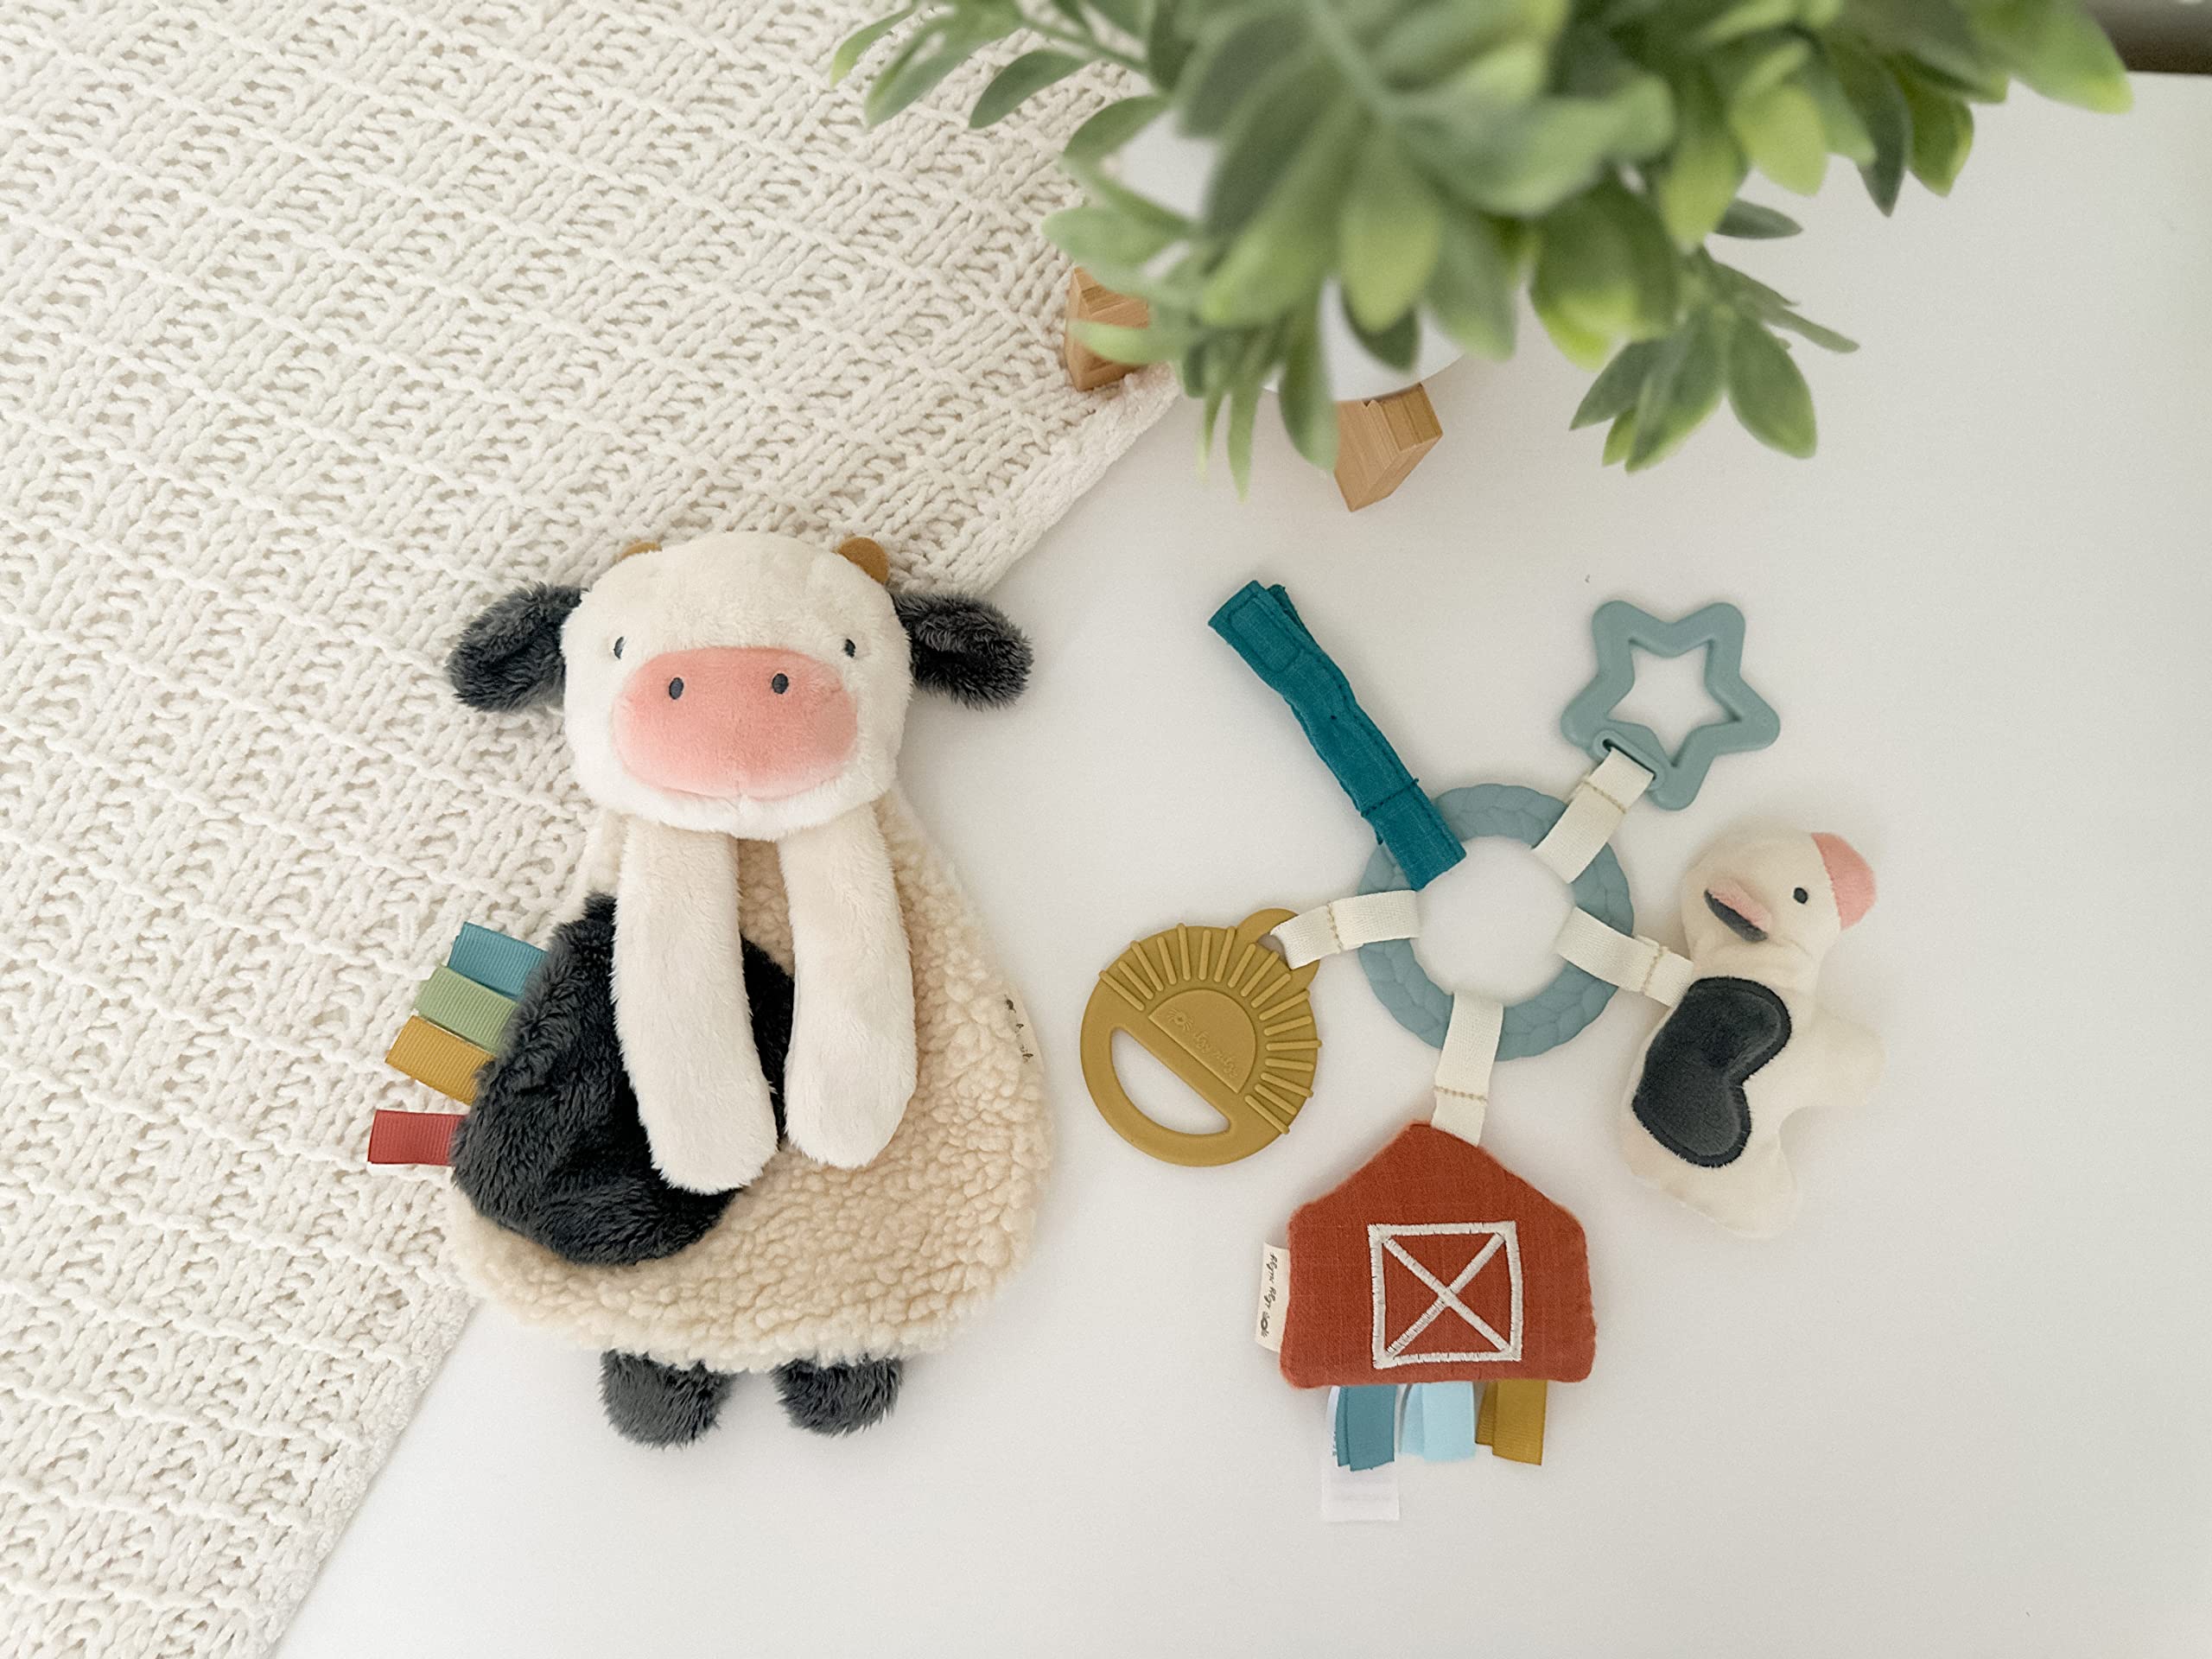 Itzy Ritzy Farm Toy Gift Set - Includes Cow Lovey & Farm-Themed Car Seat and Stroller Toy